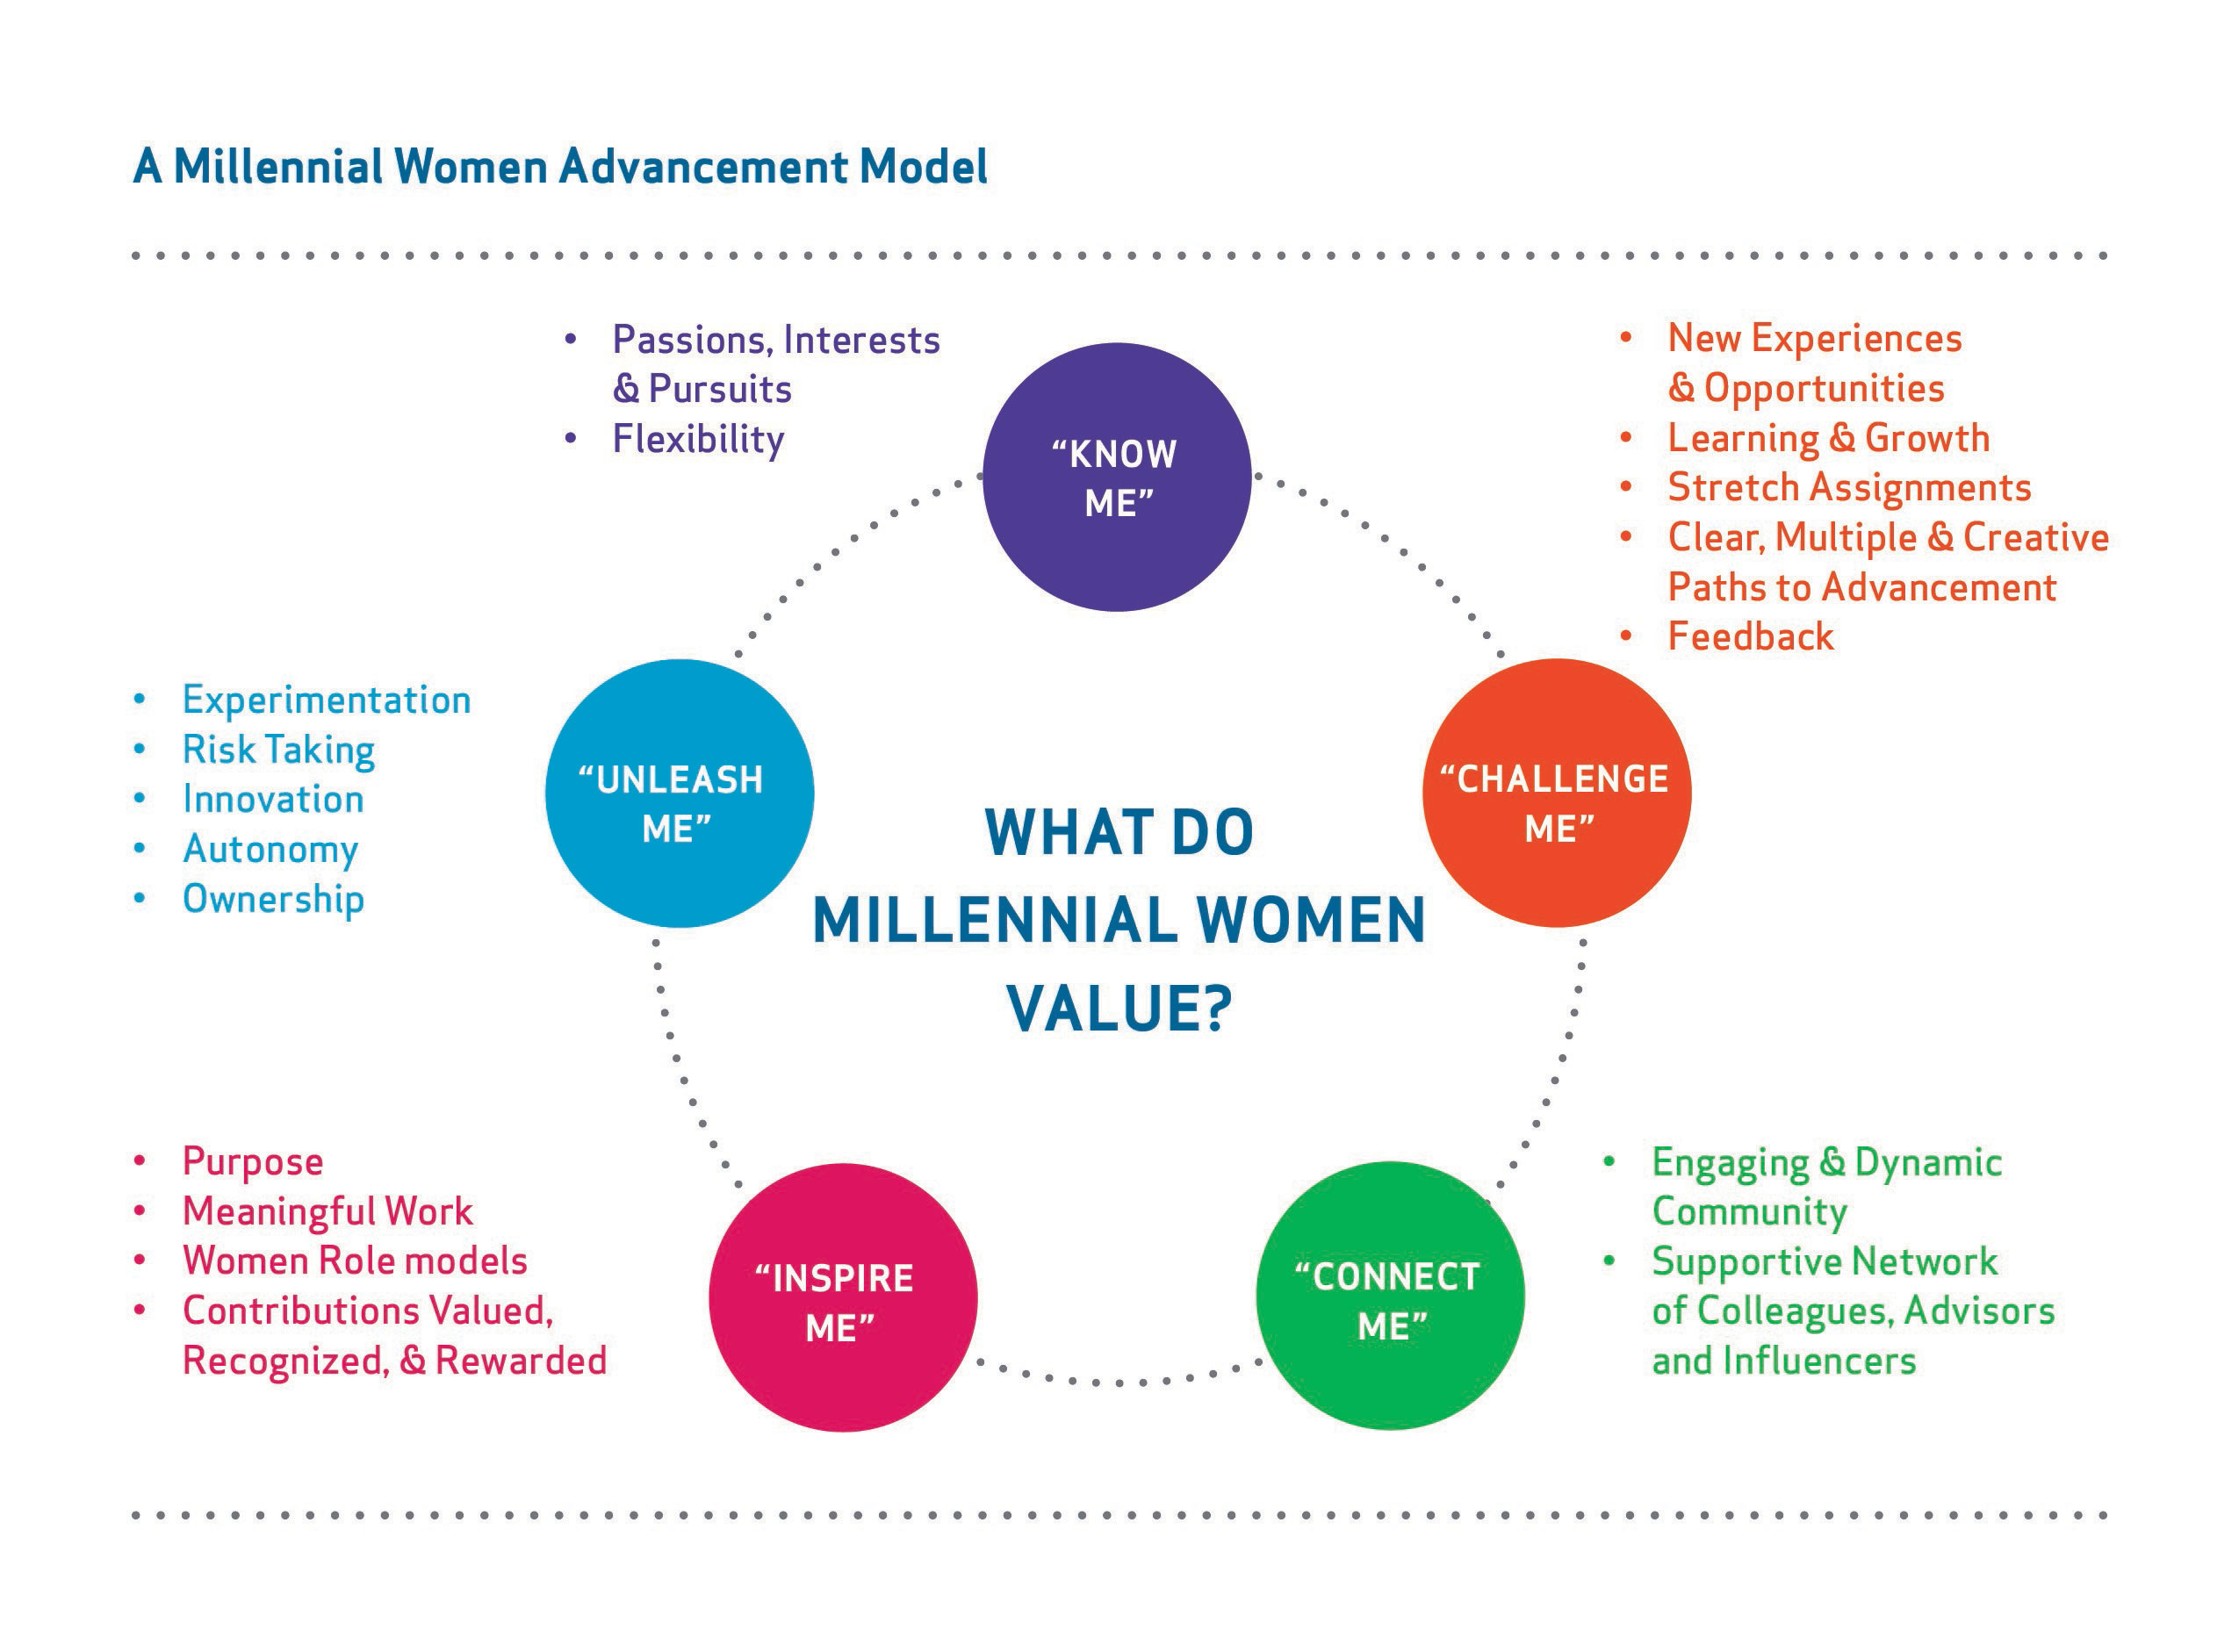 ICEDR Study on the Challenges of Millennial Women 